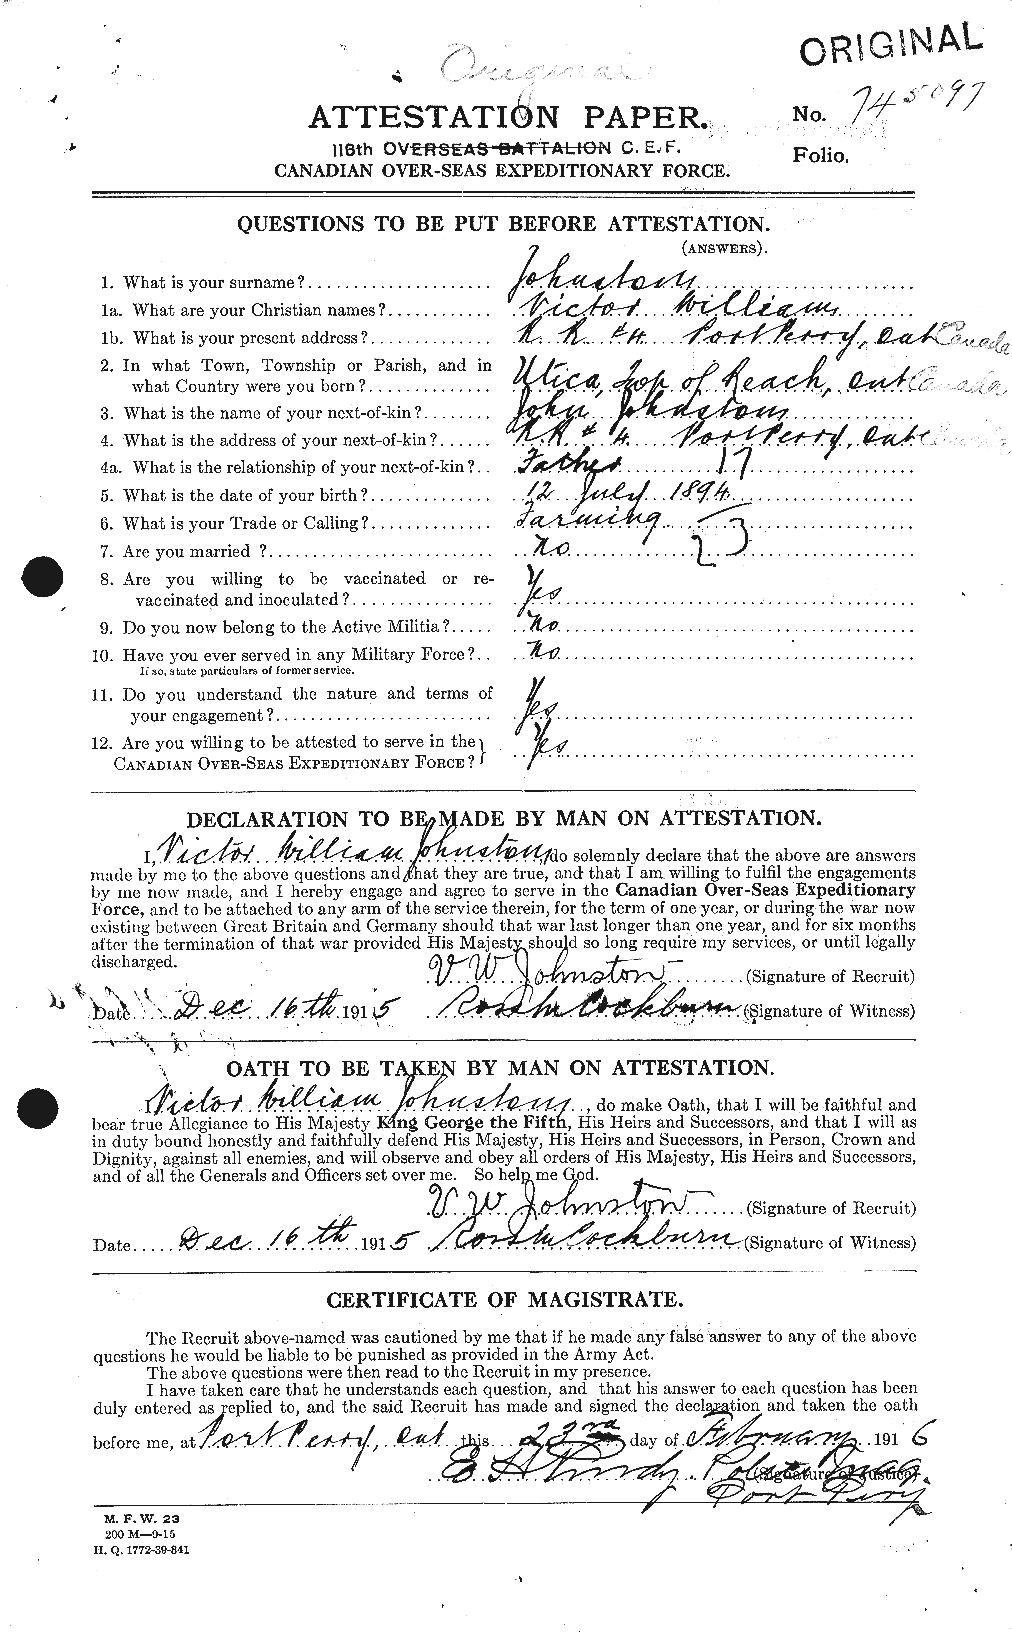 Personnel Records of the First World War - CEF 427193a